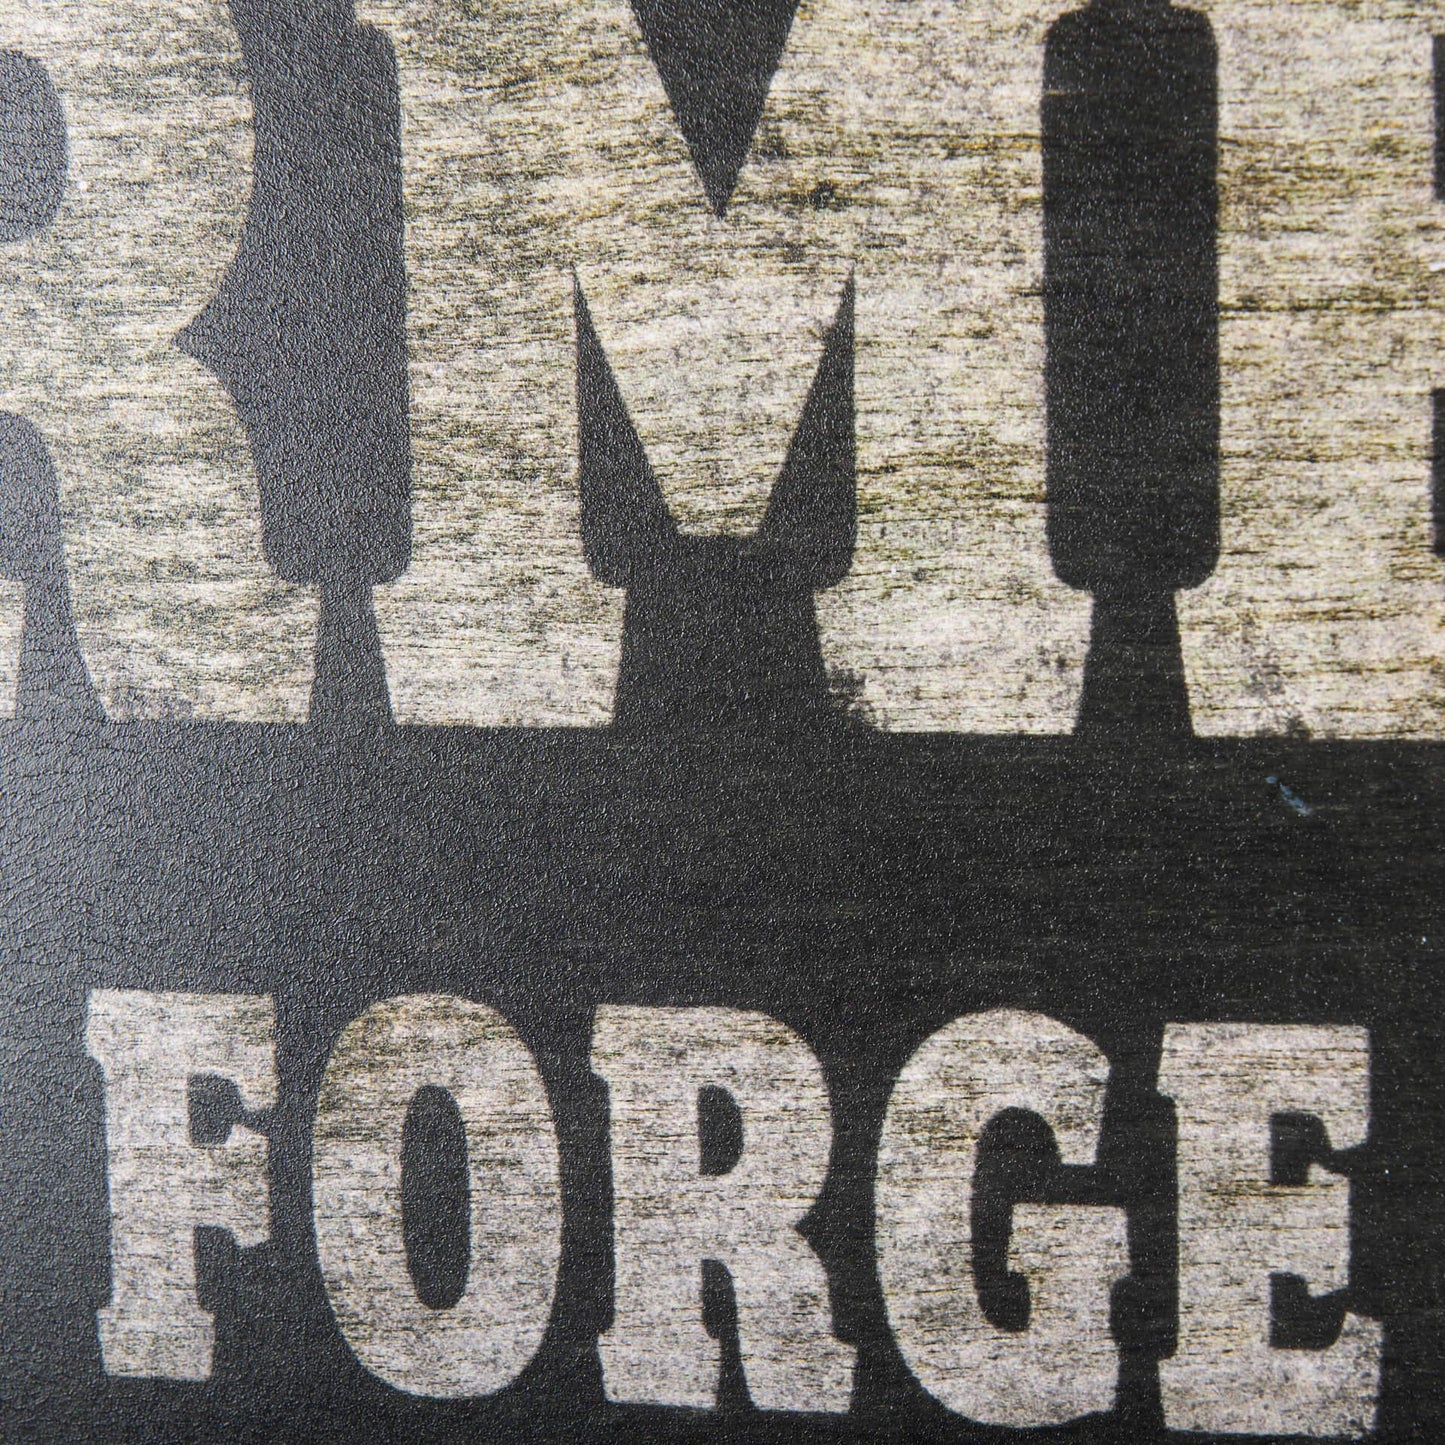 Farmers Forge Sign